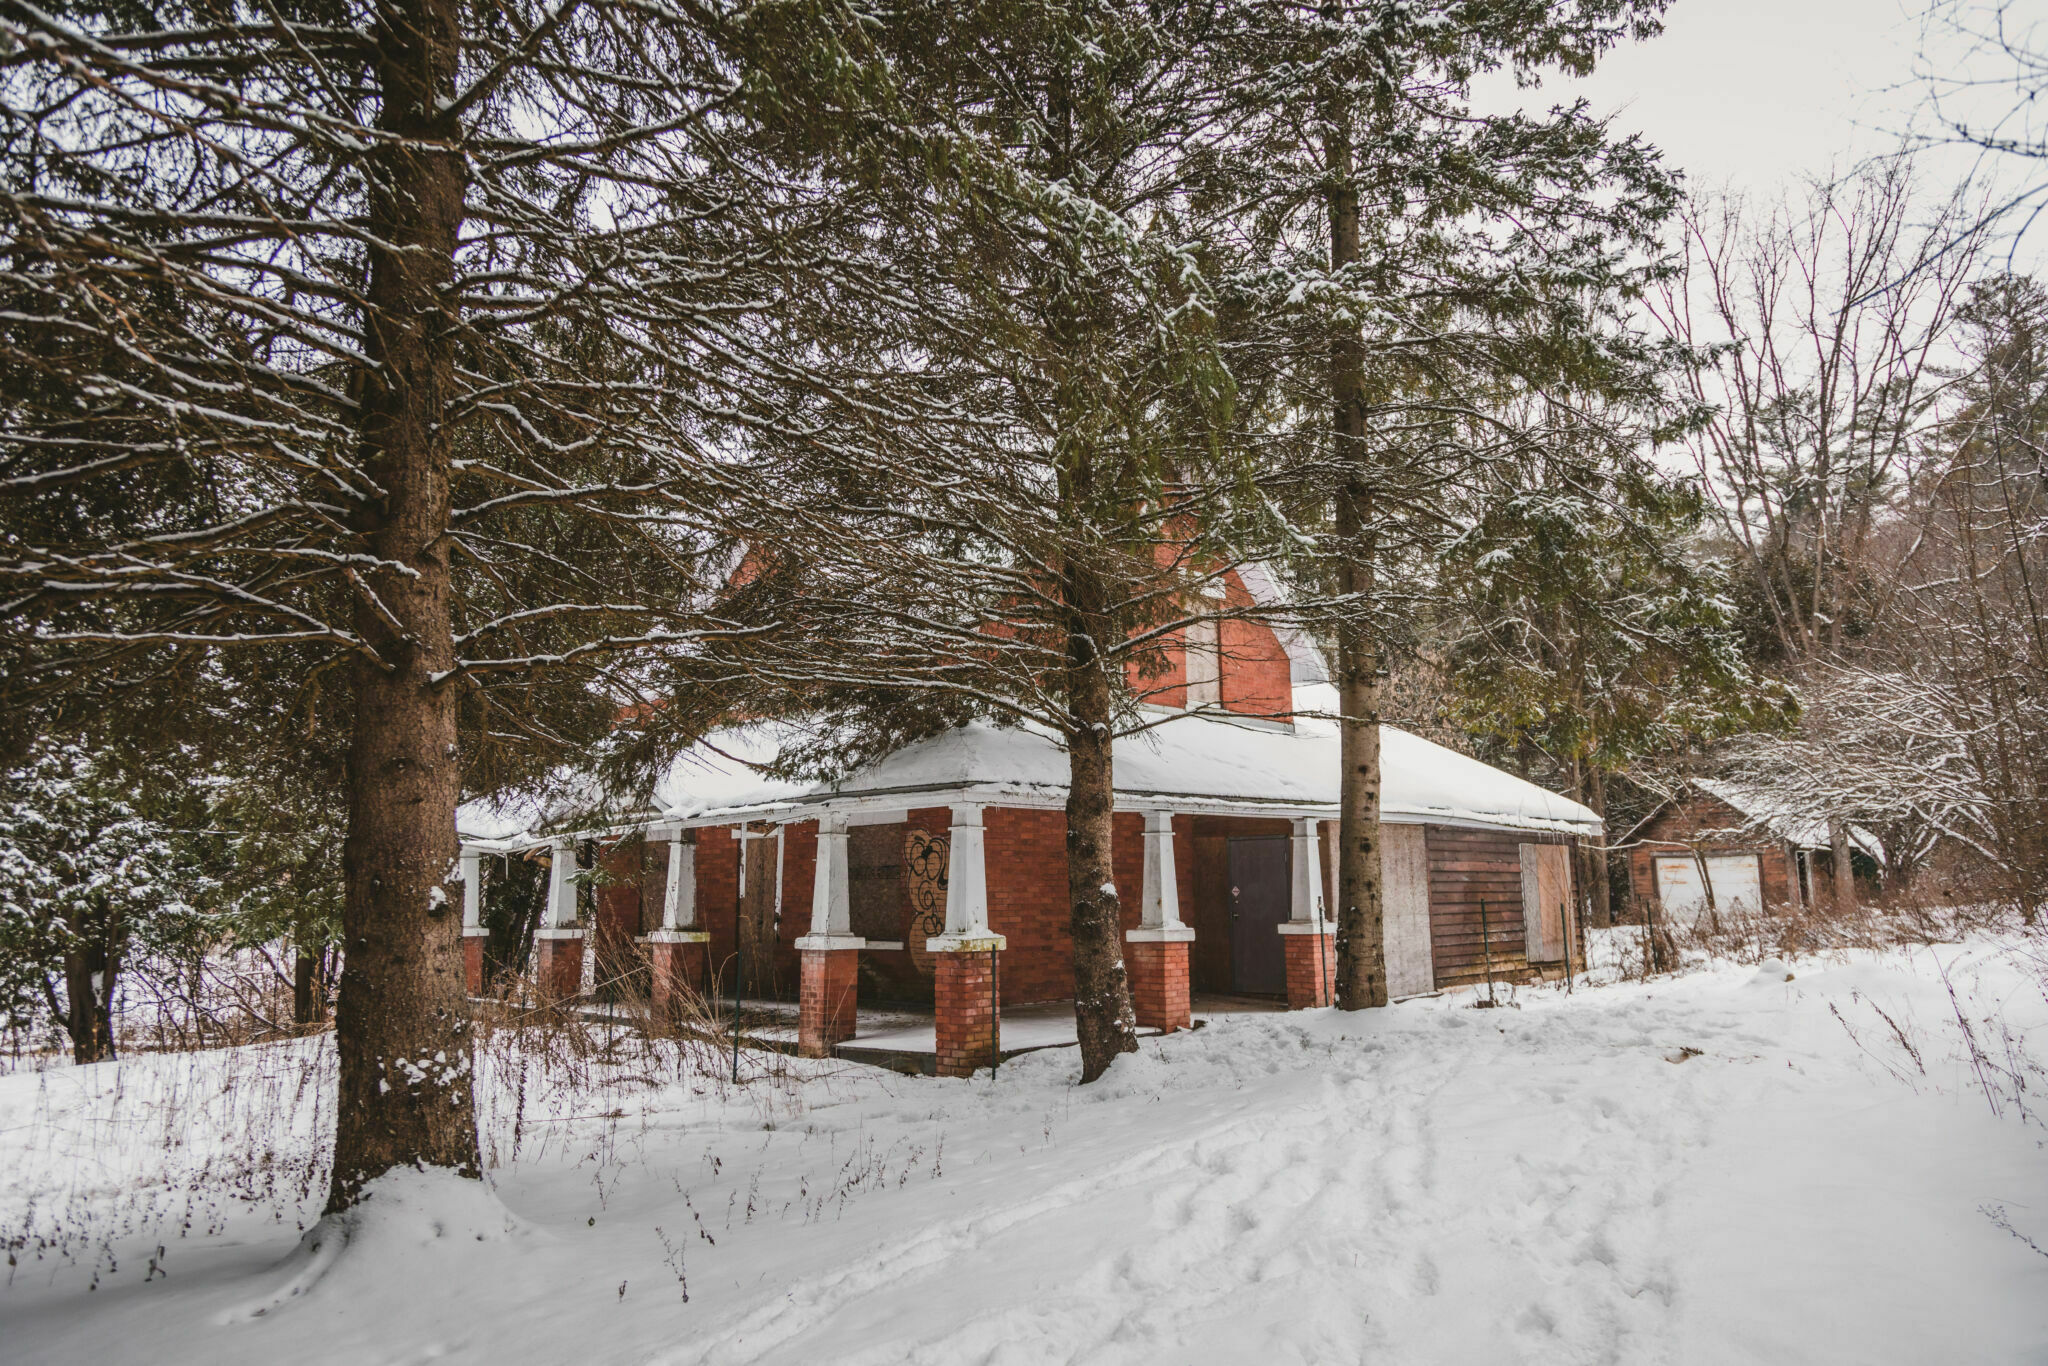 Exterior view of 108 Pine Road in winter